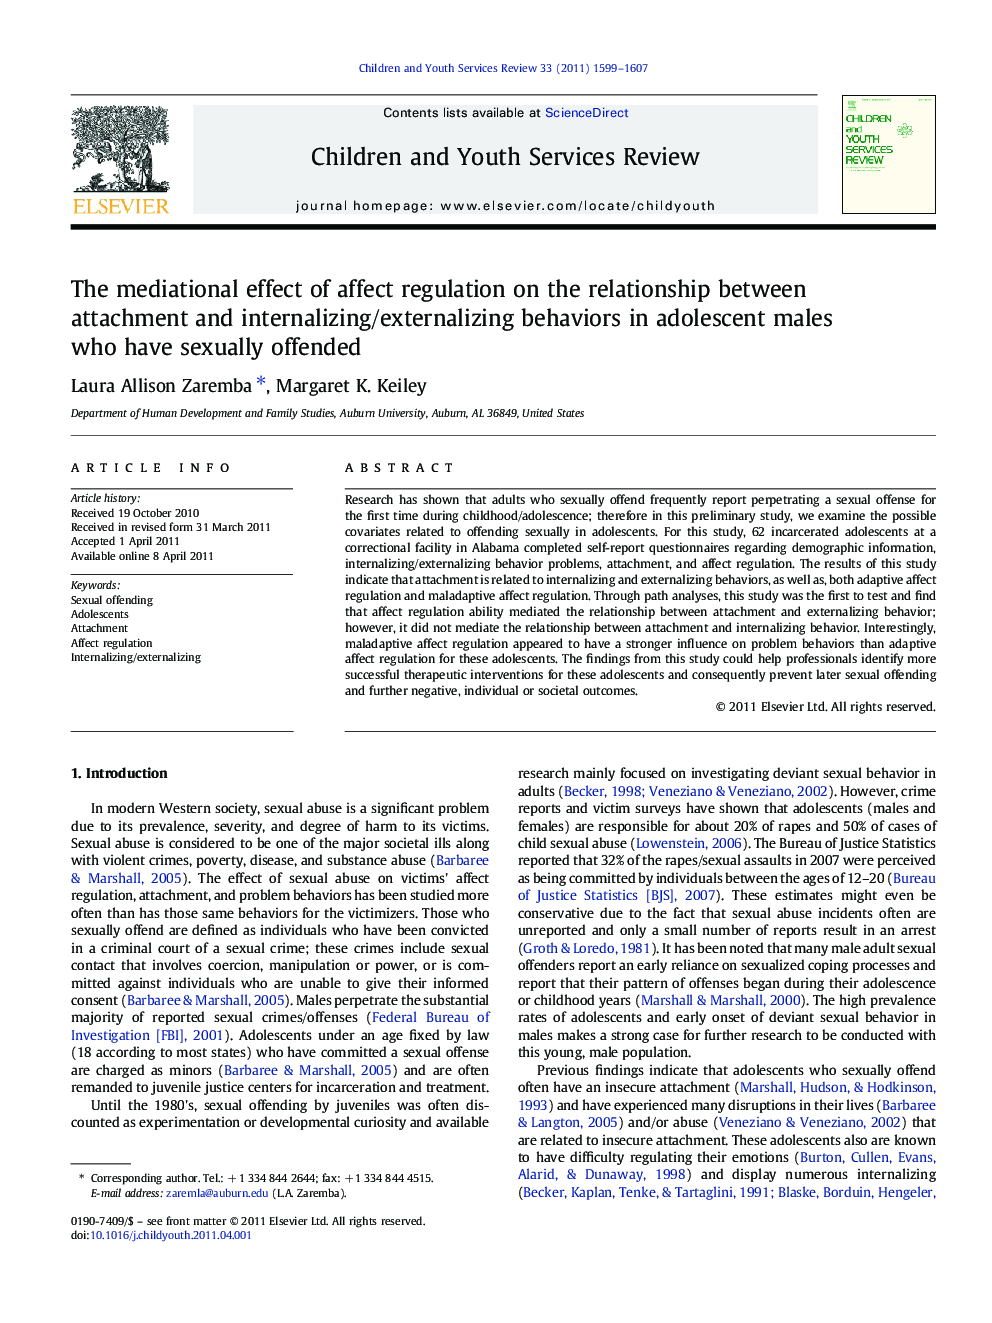 The mediational effect of affect regulation on the relationship between attachment and internalizing/externalizing behaviors in adolescent males who have sexually offended